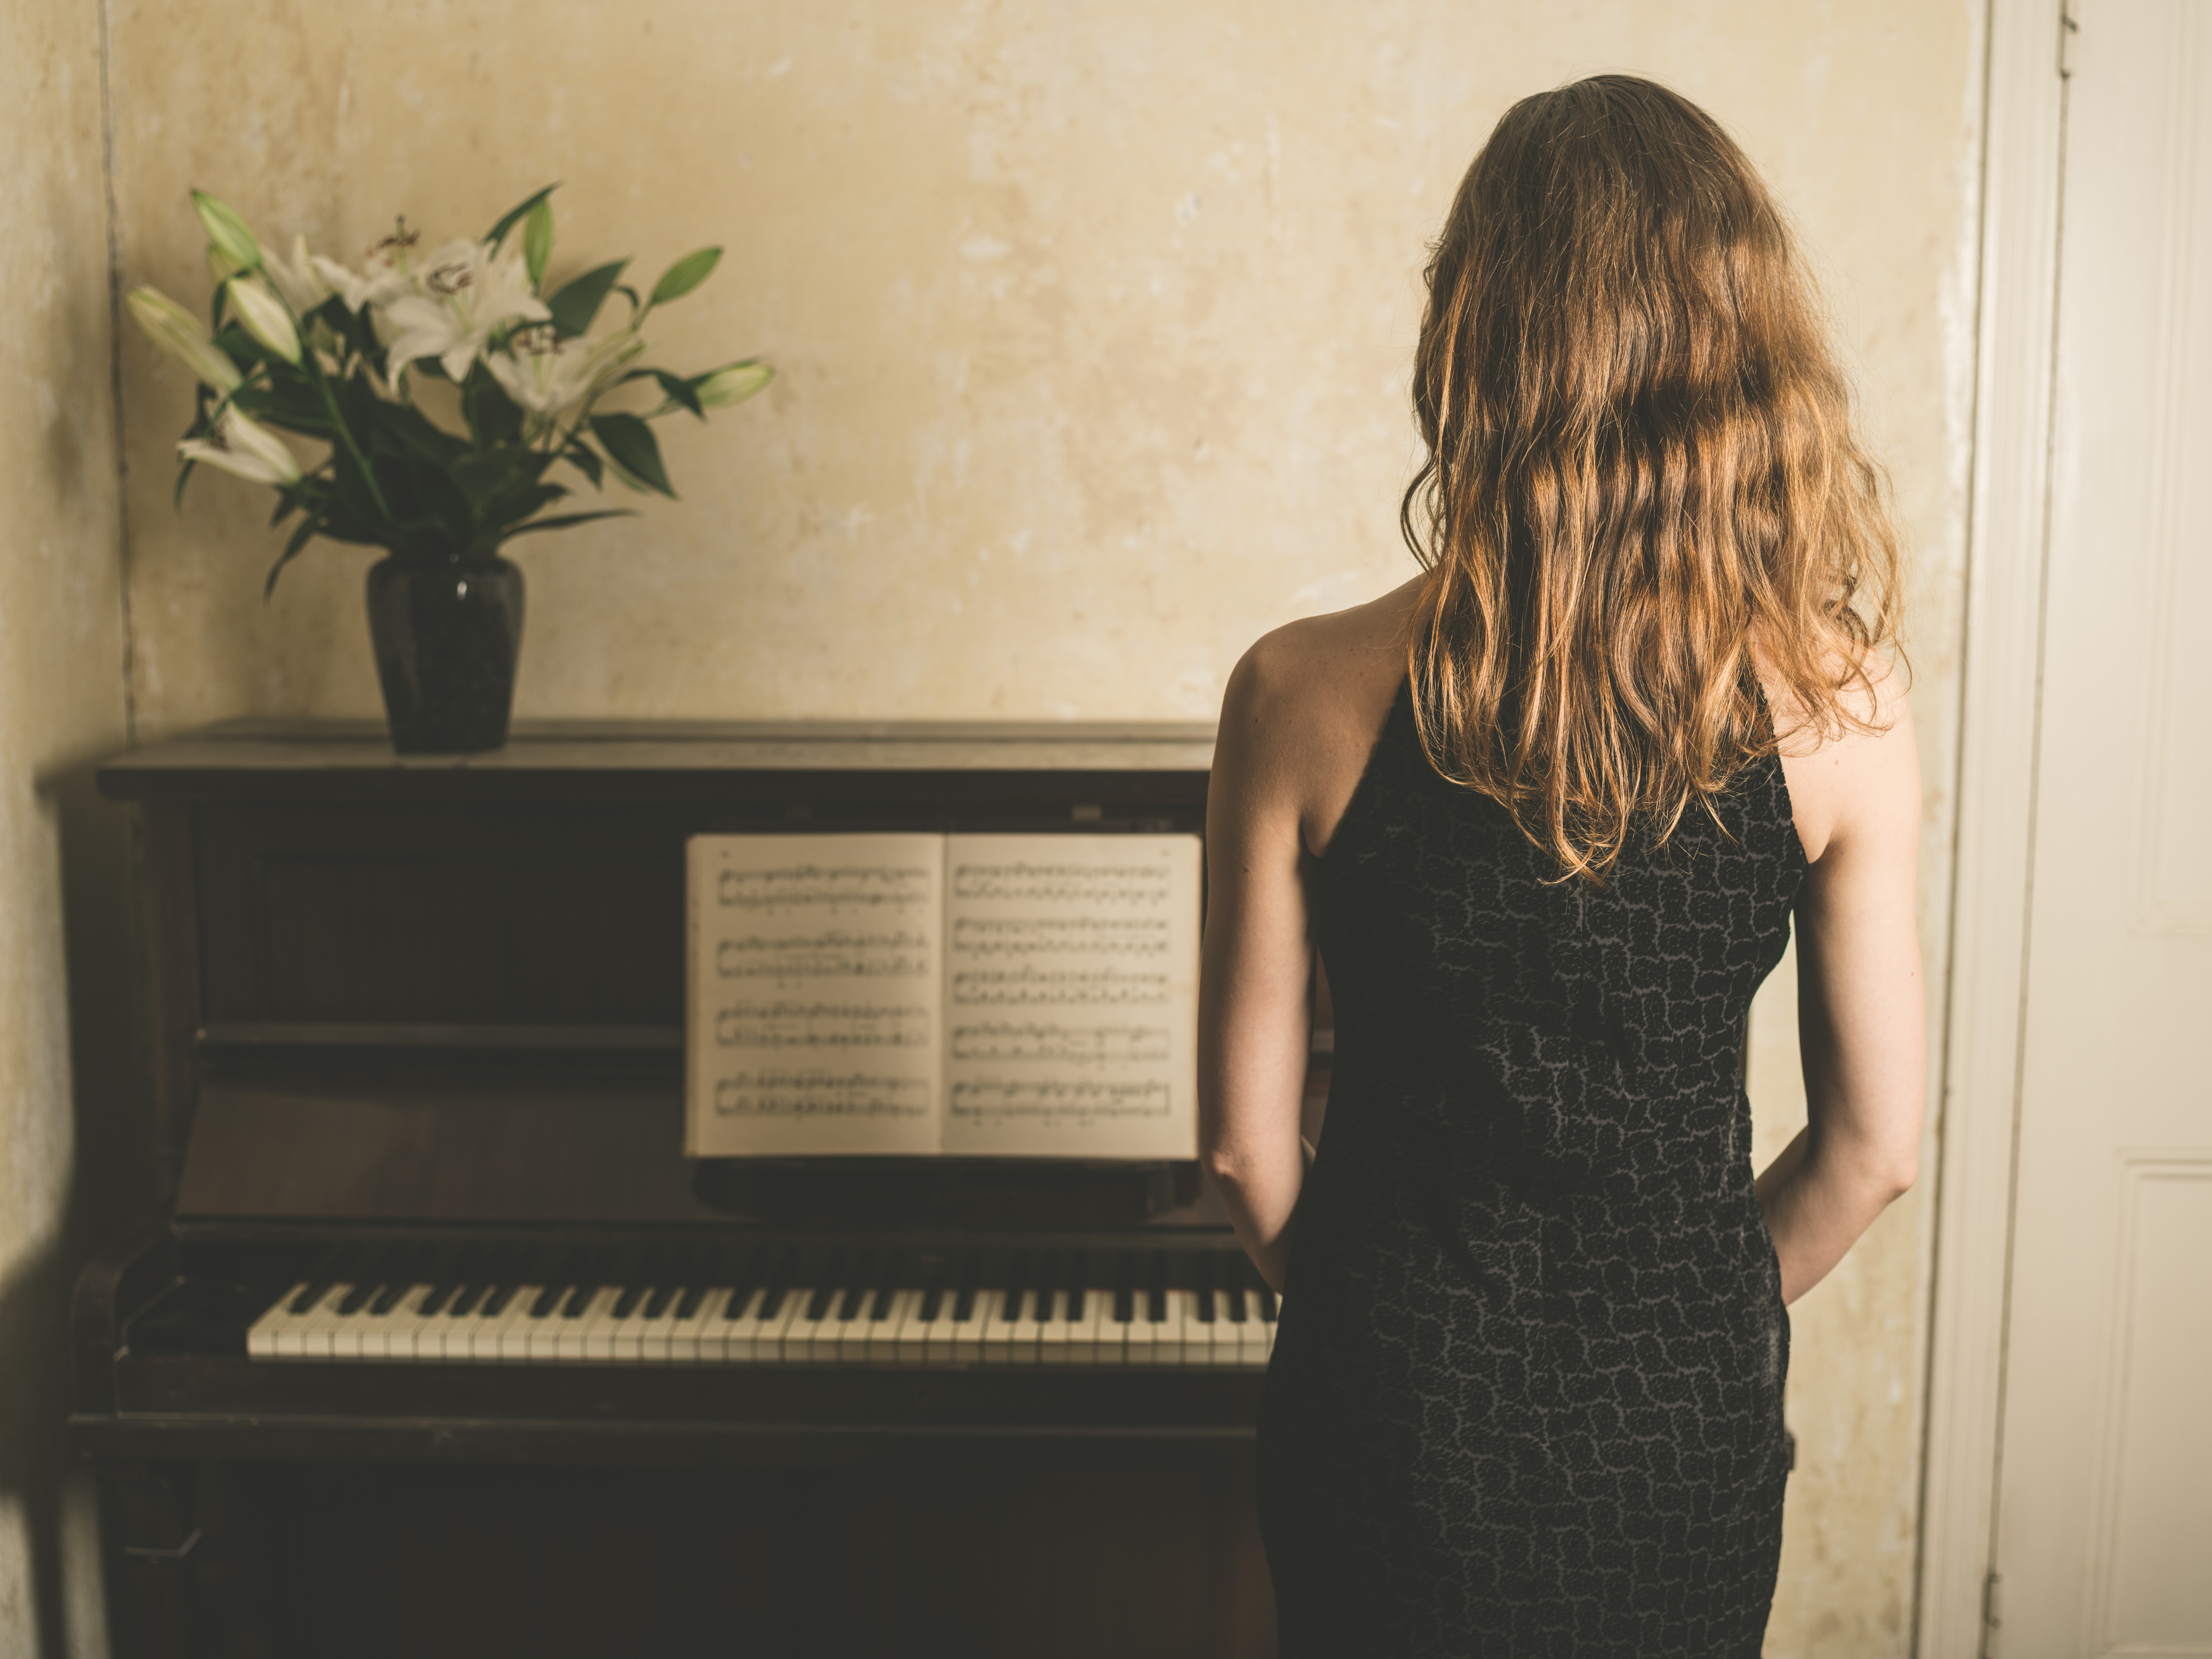 Woman in Dress by the Piano